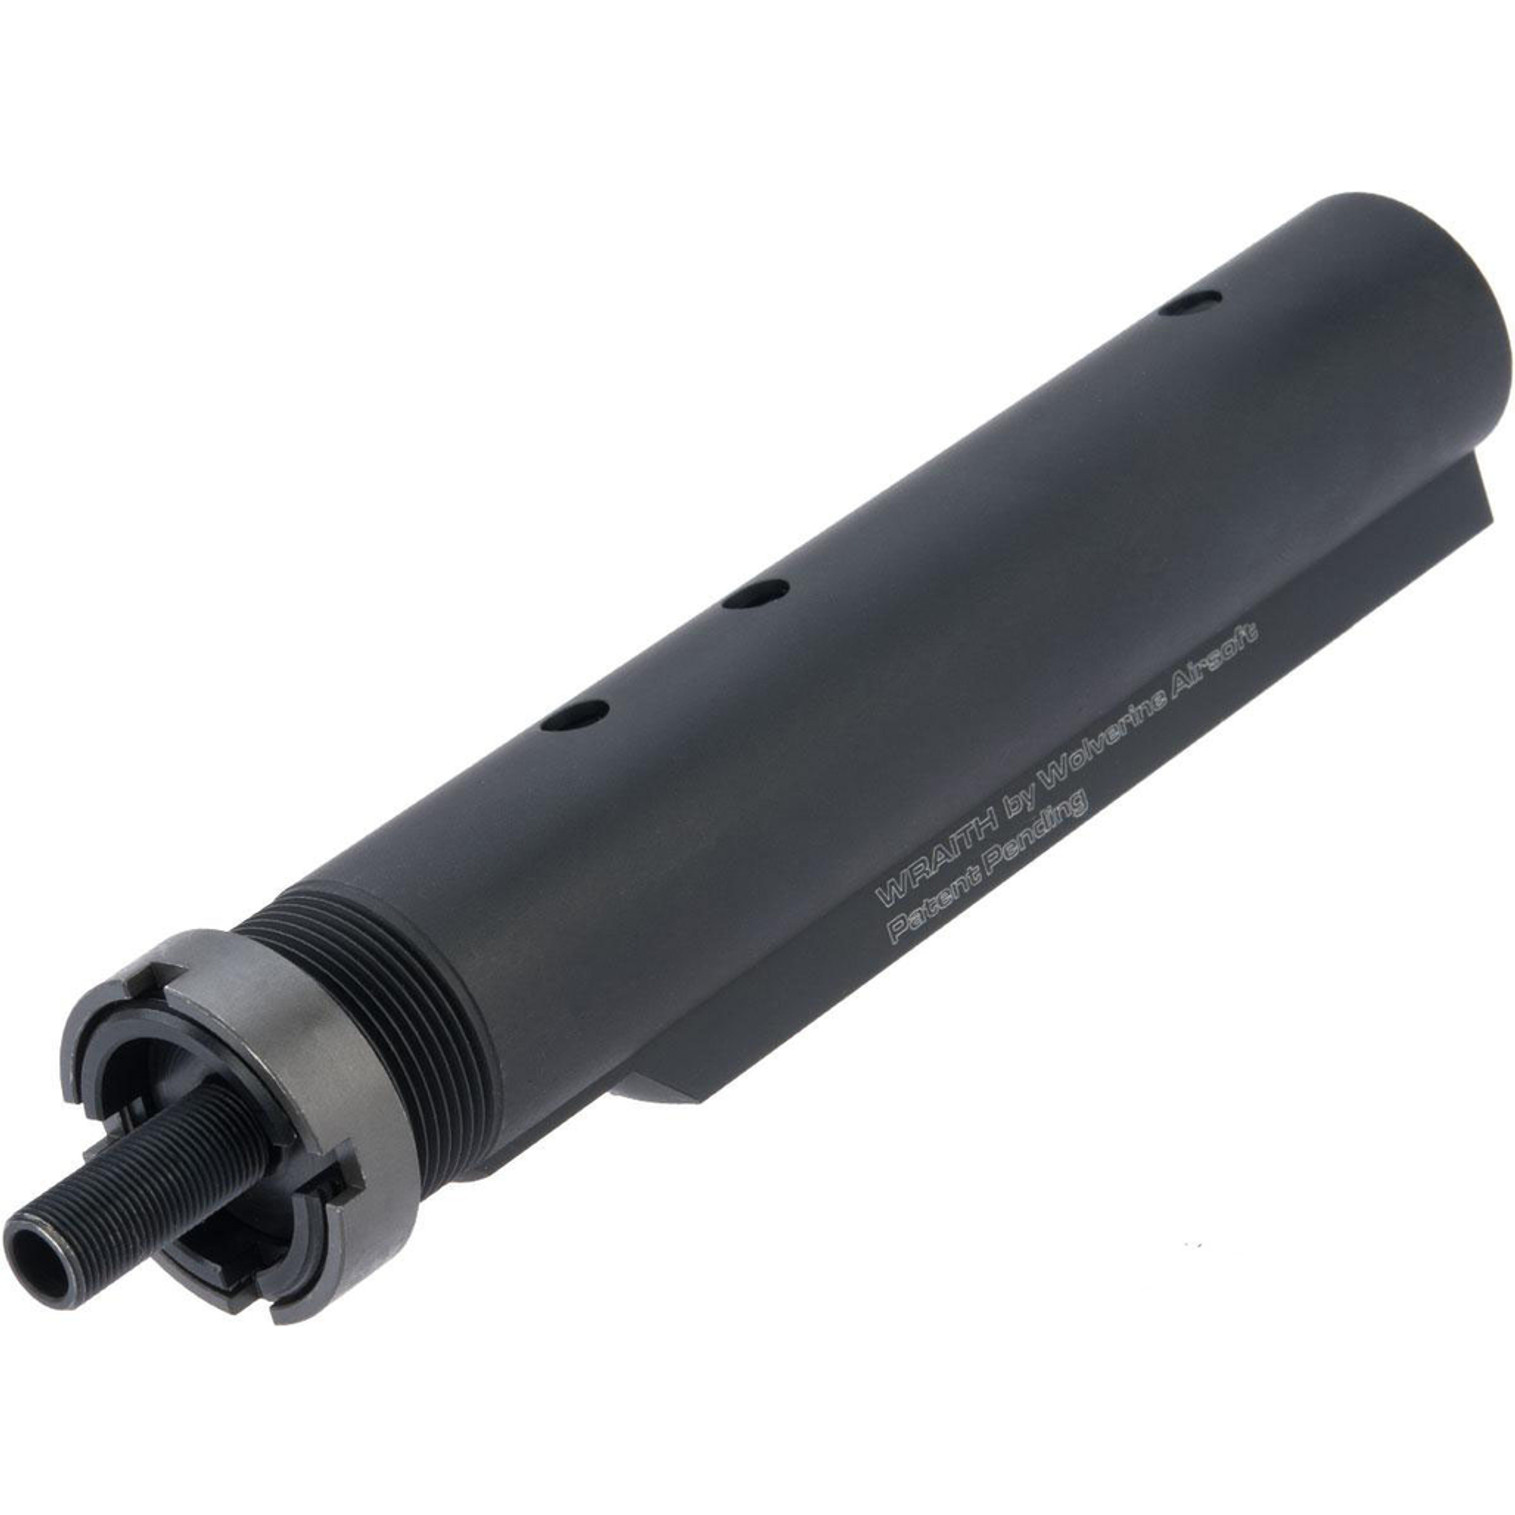 Wolverine Airsoft Wraith 33g CO2 Stock w/ Storm In-Buffer Regulator for MTW M4 Series Rifles